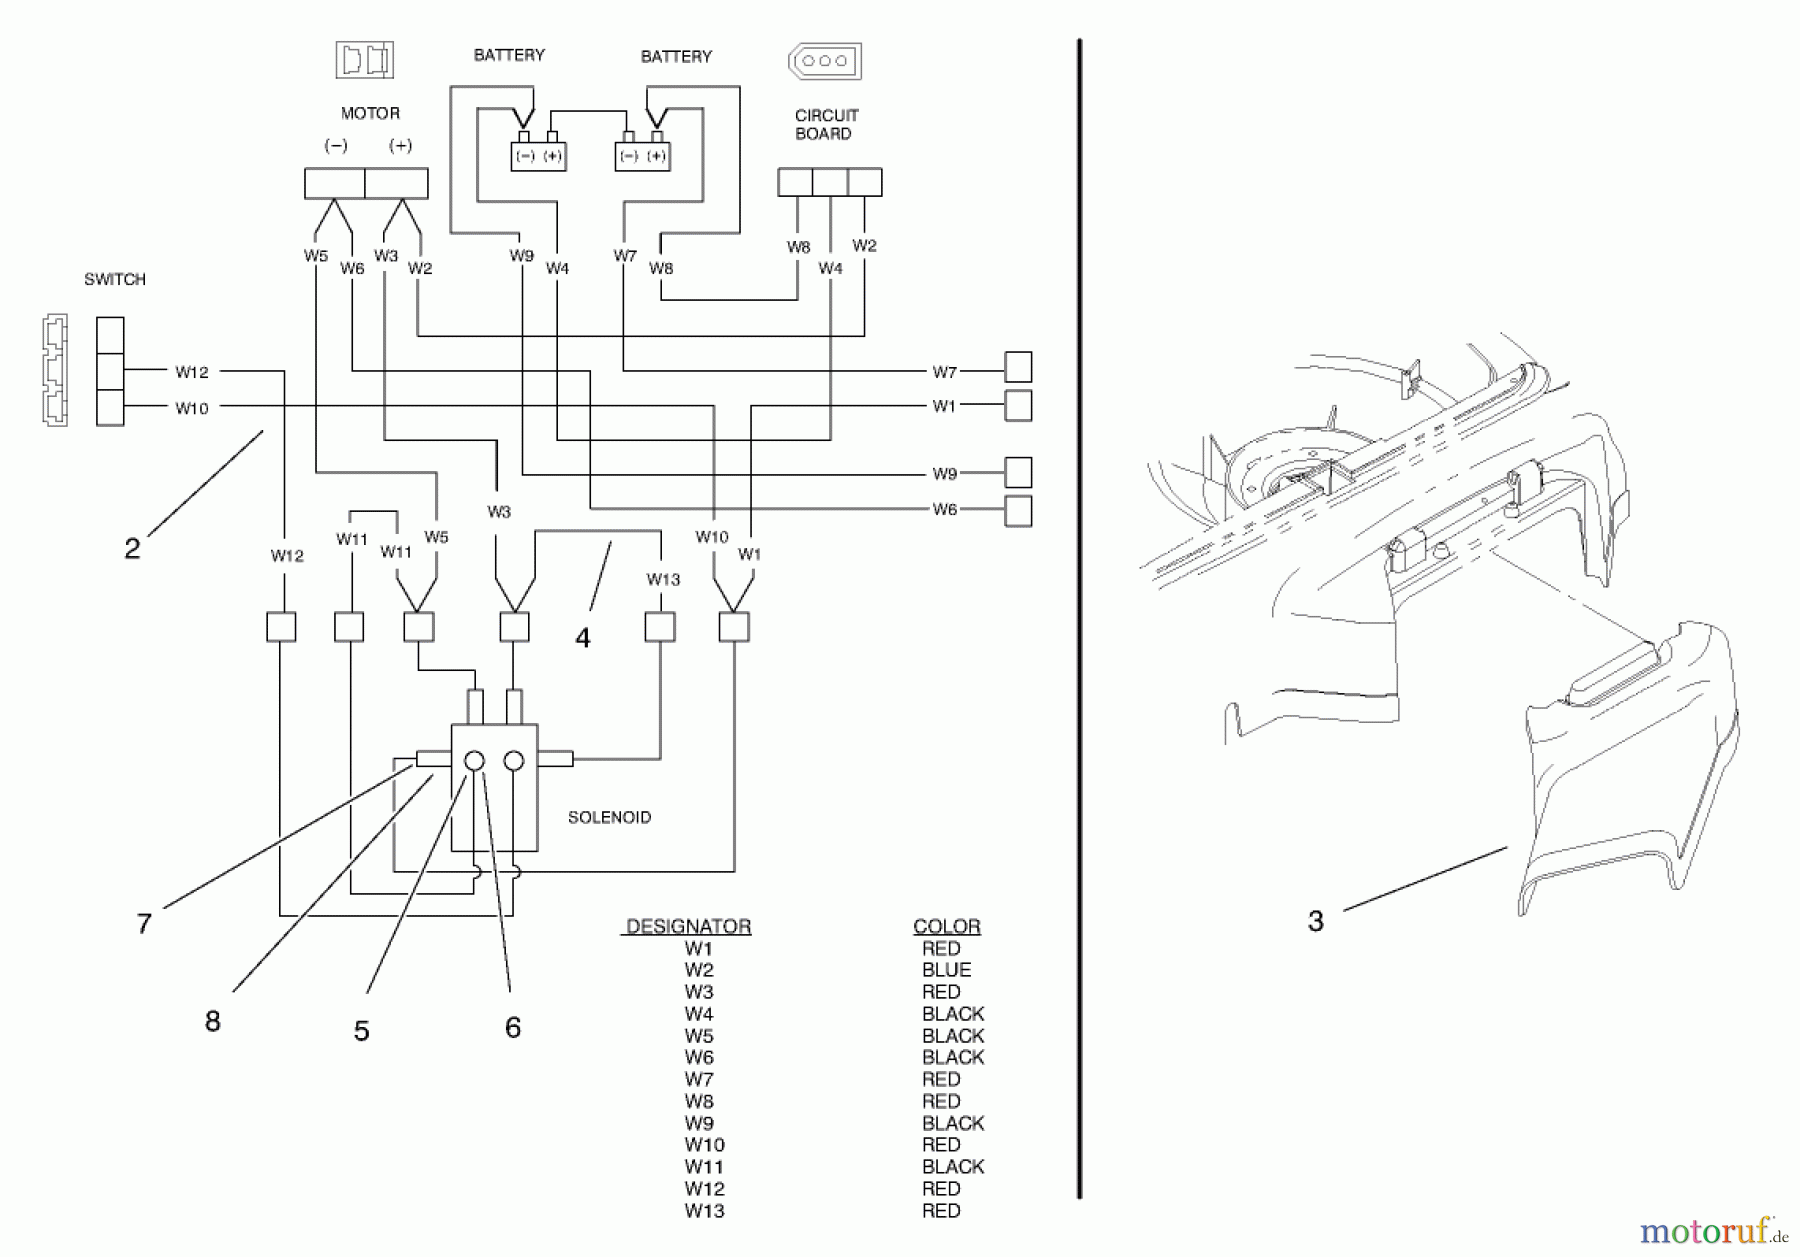  Toro Neu Mowers, Electric 20650 - Toro Carefree Recycler Electric Mower, E36, 1998 (89000001-89999999) ELECTRICAL WIRING DIAGRAM AND SIDE DISCHARGE CHUTE